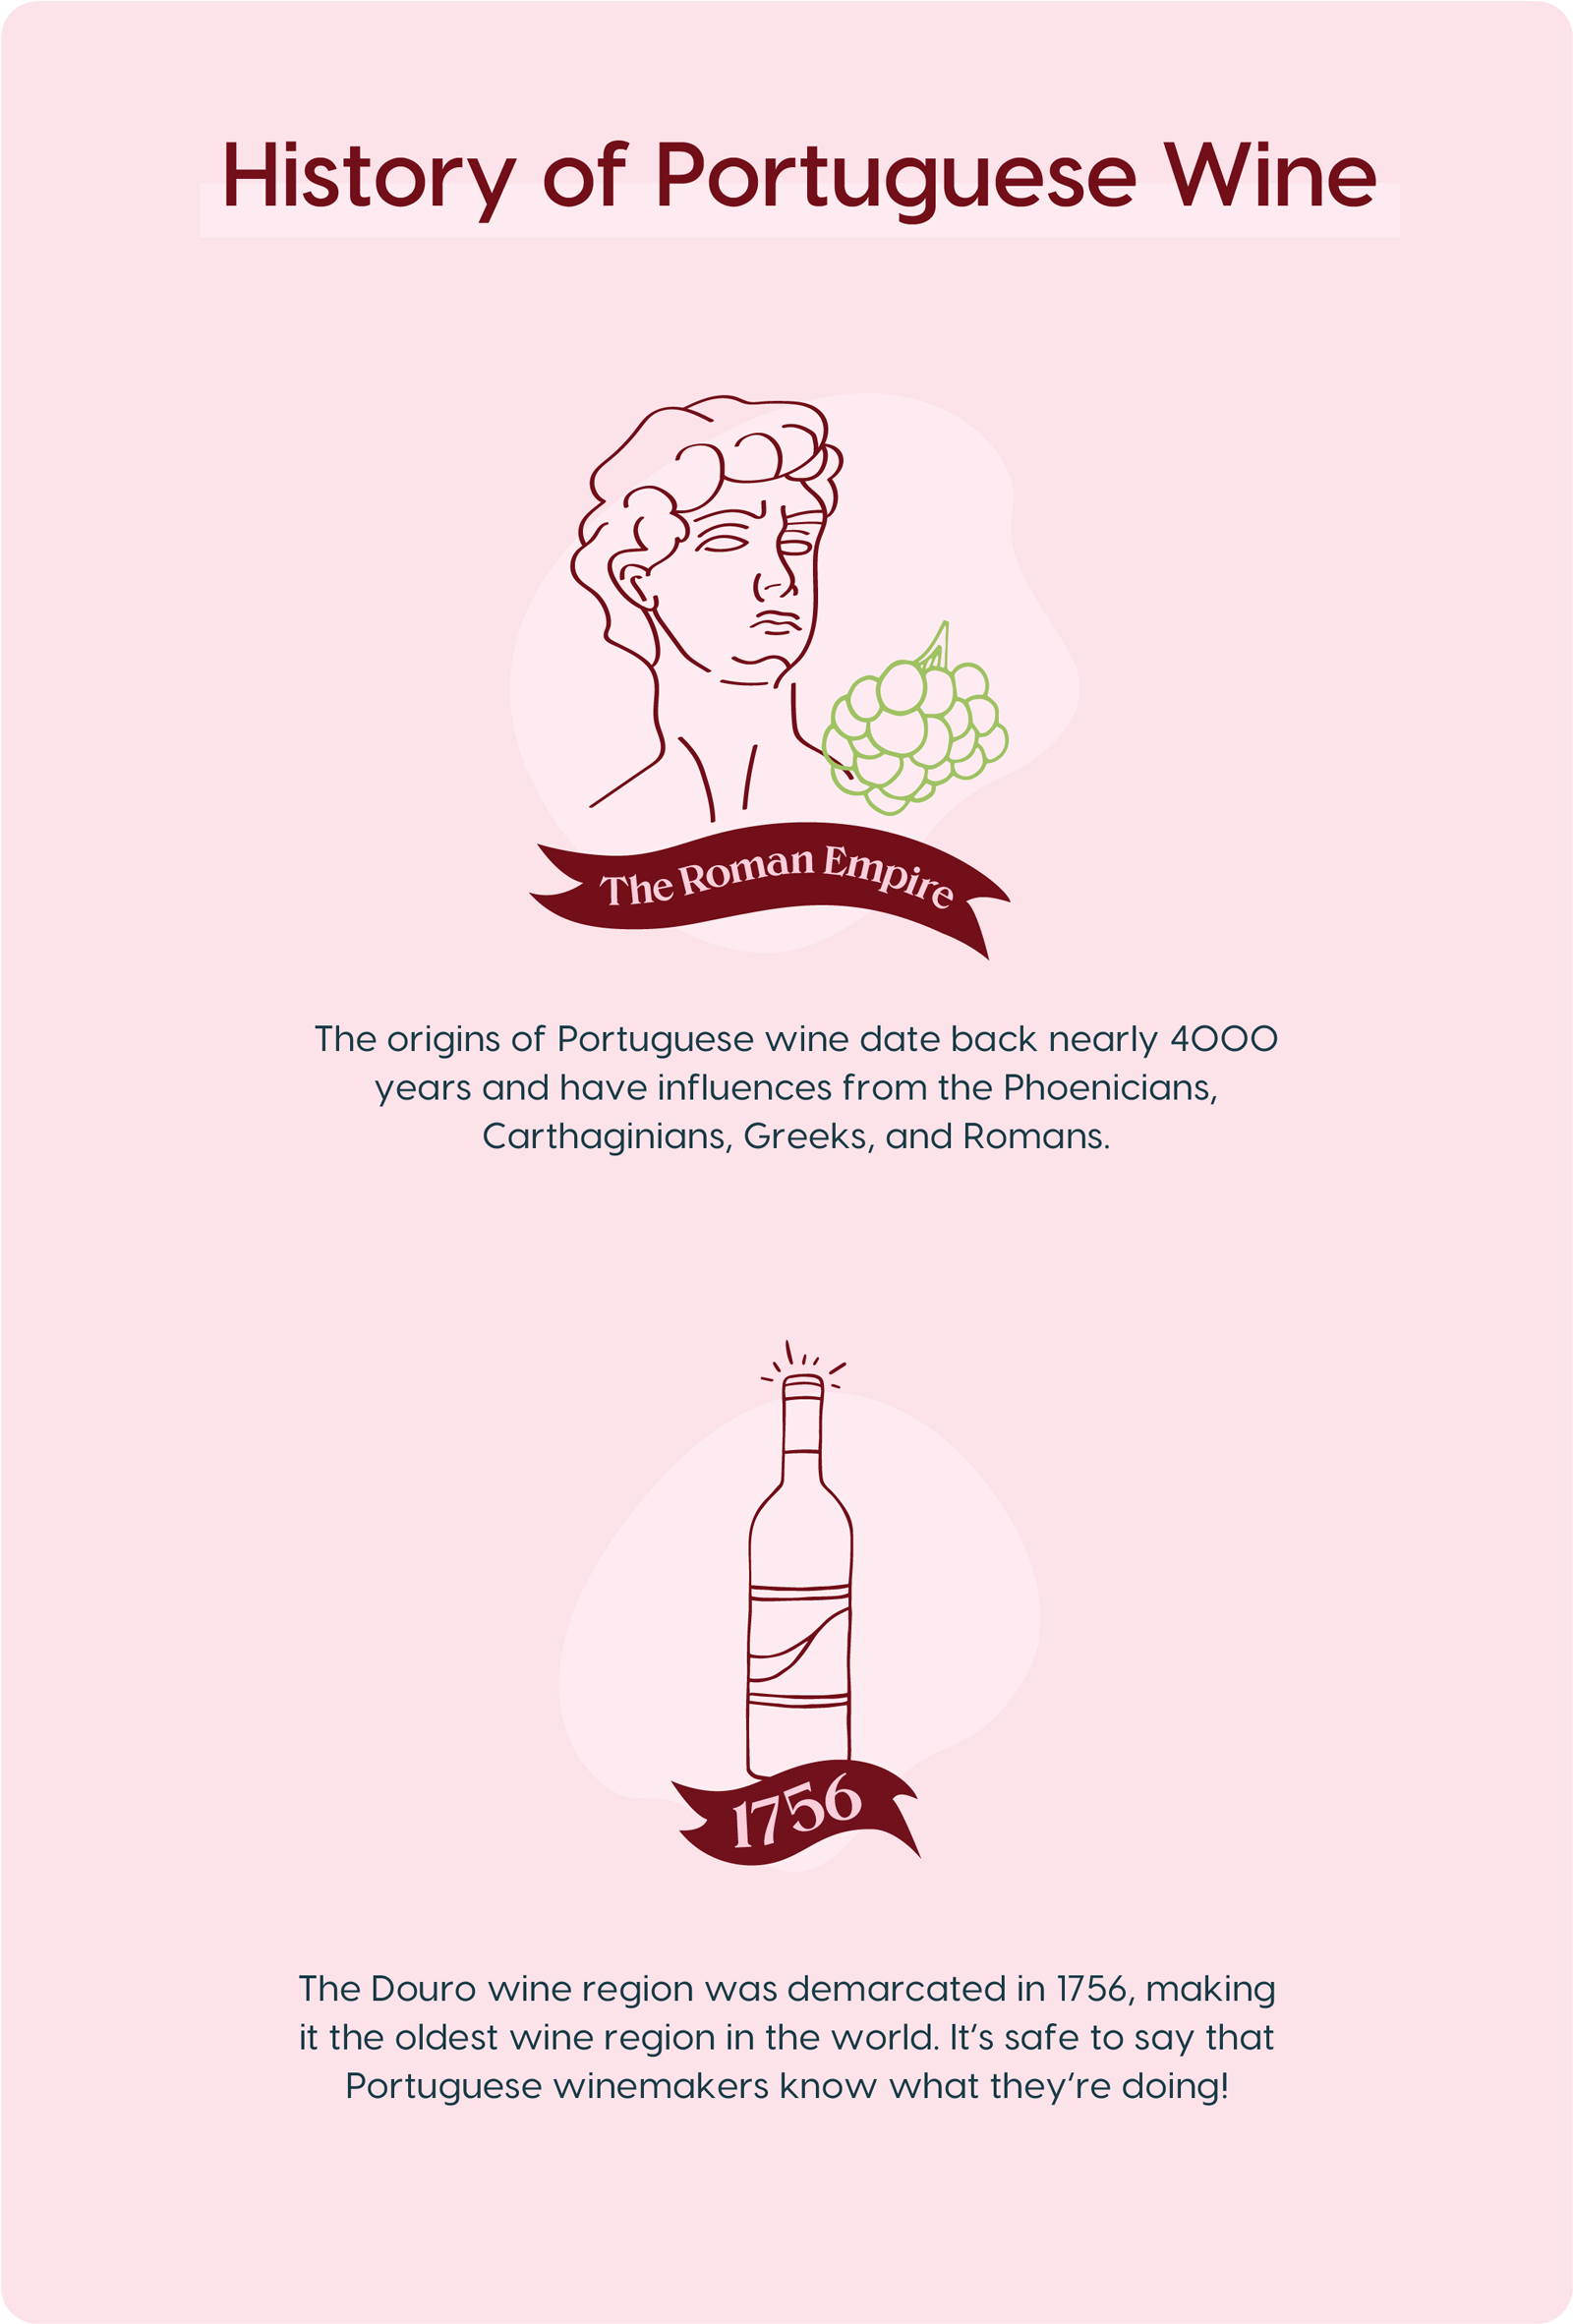 History of Portuguese Wines